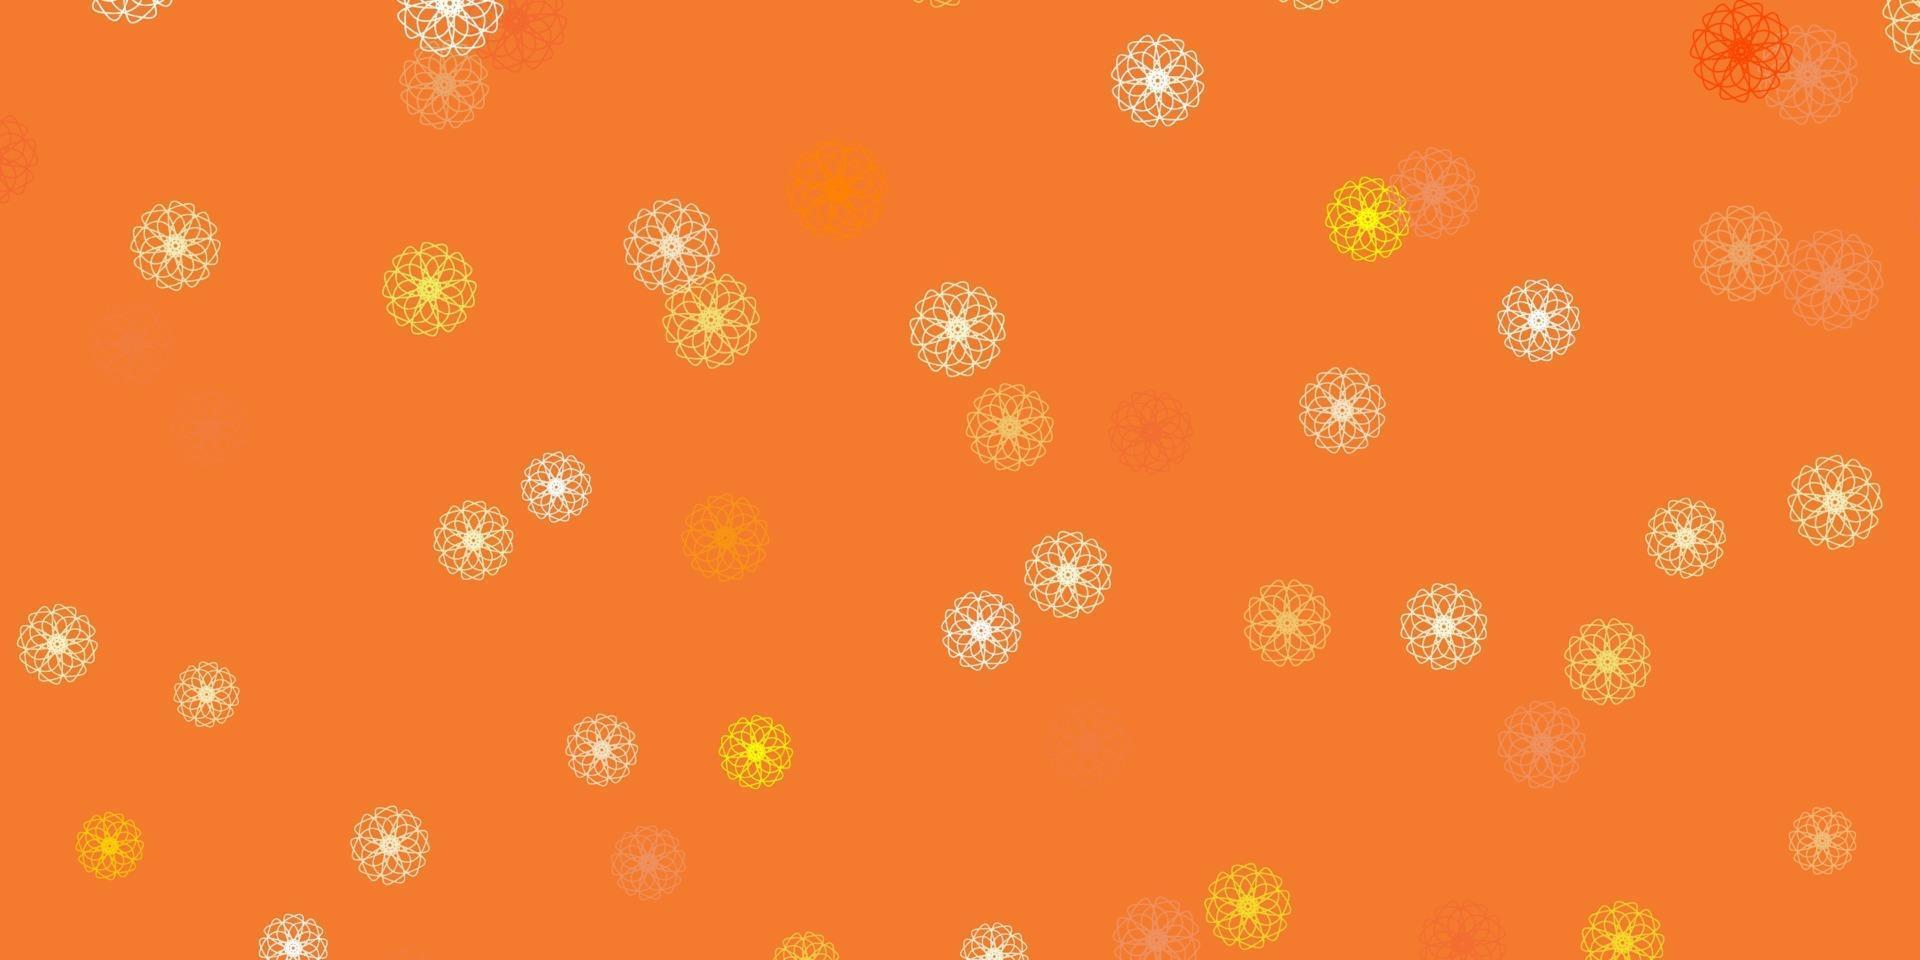 Light yellow vector doodle texture with flowers.